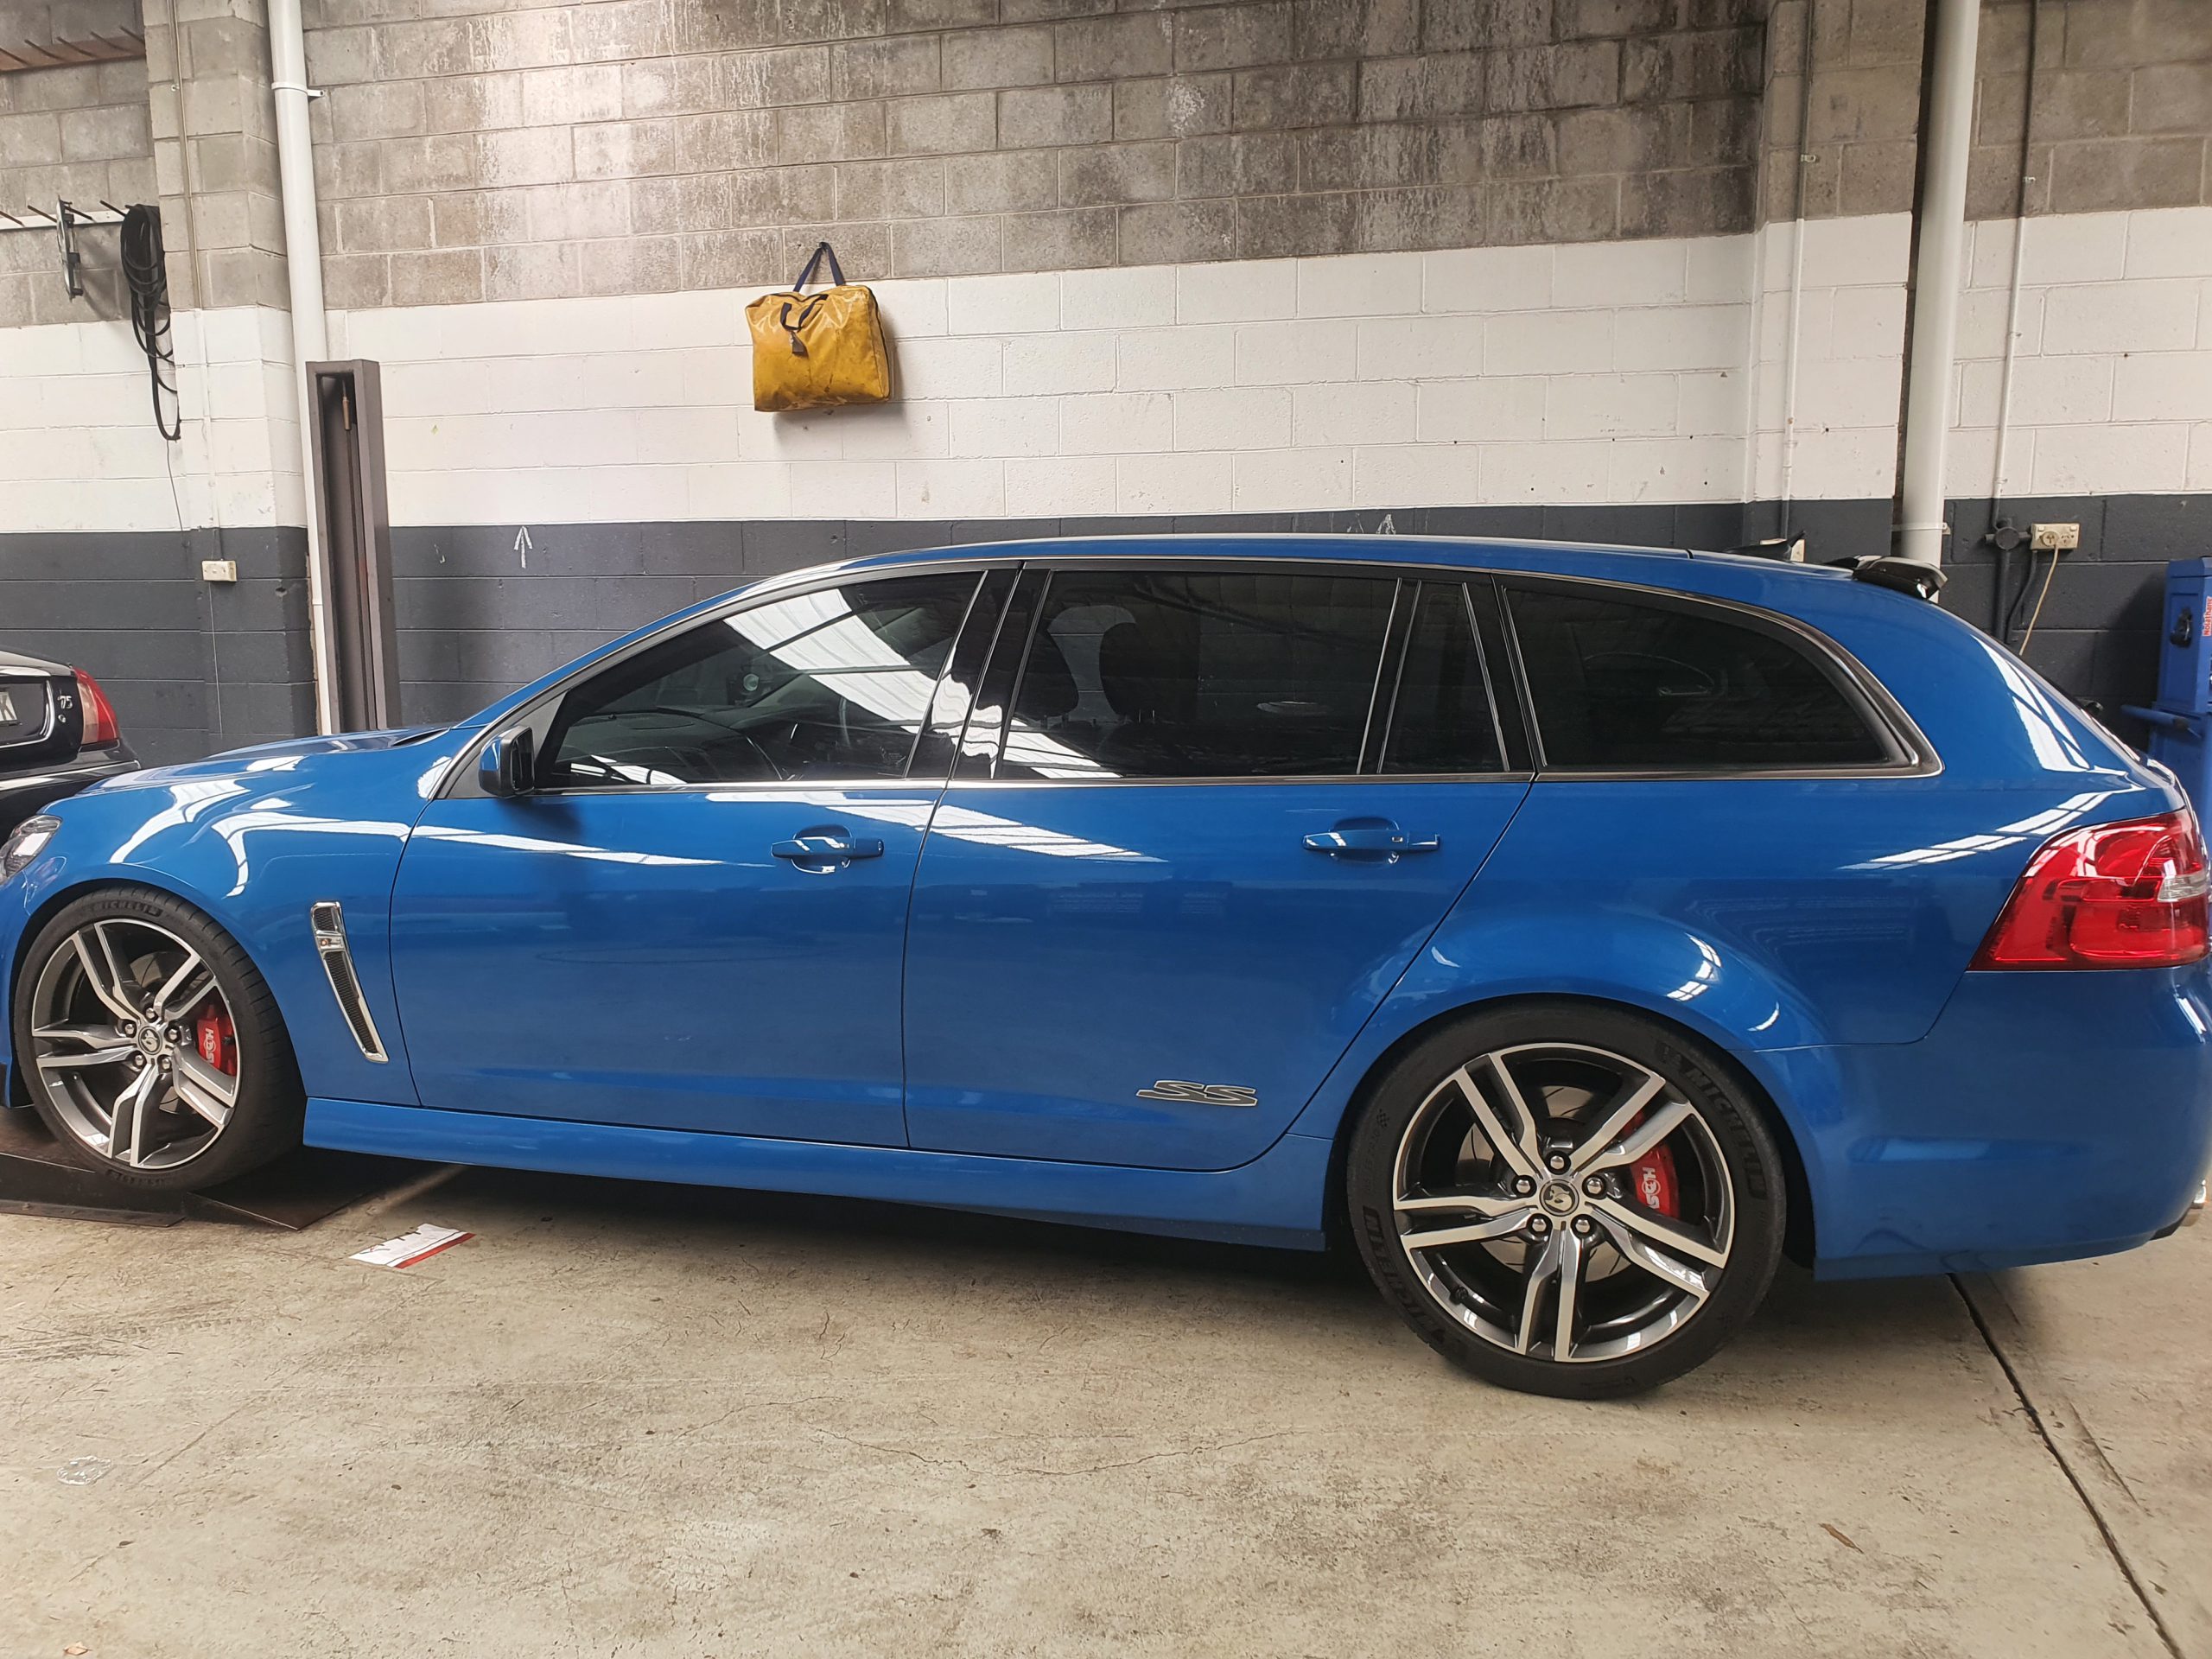 Holden commodore independent workshop Kirrawee, NSW